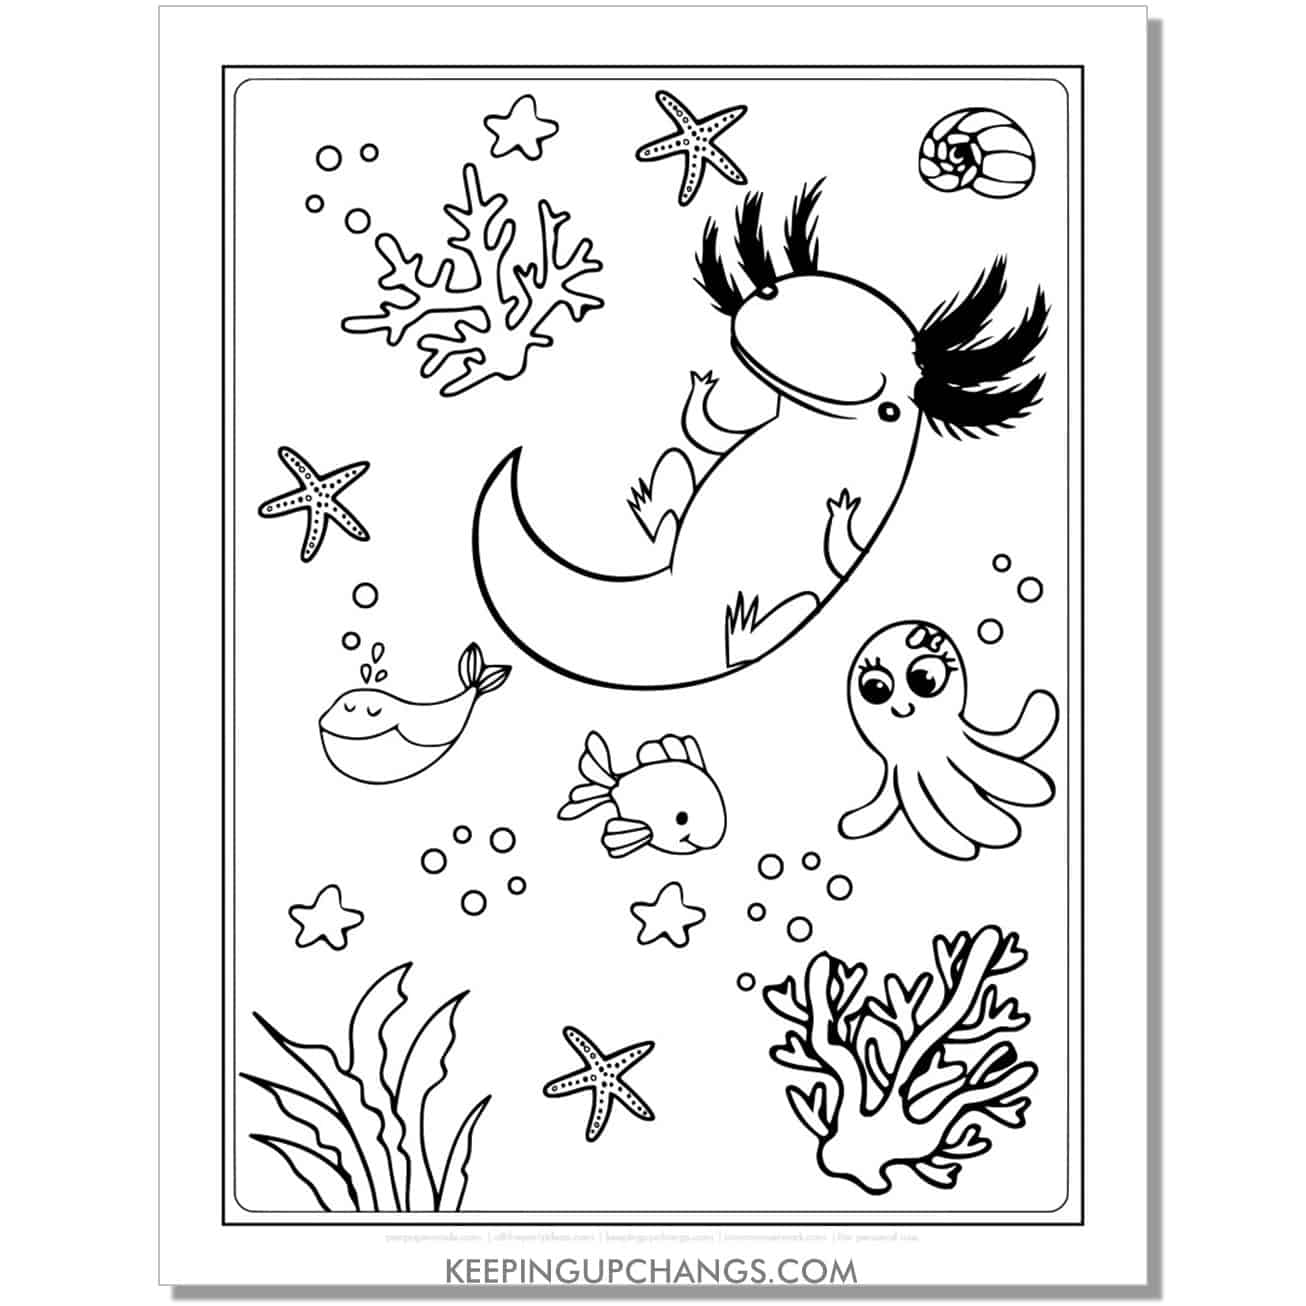 free floating axolotl coloring page, colouring sheet with octopus, starfish, whale.